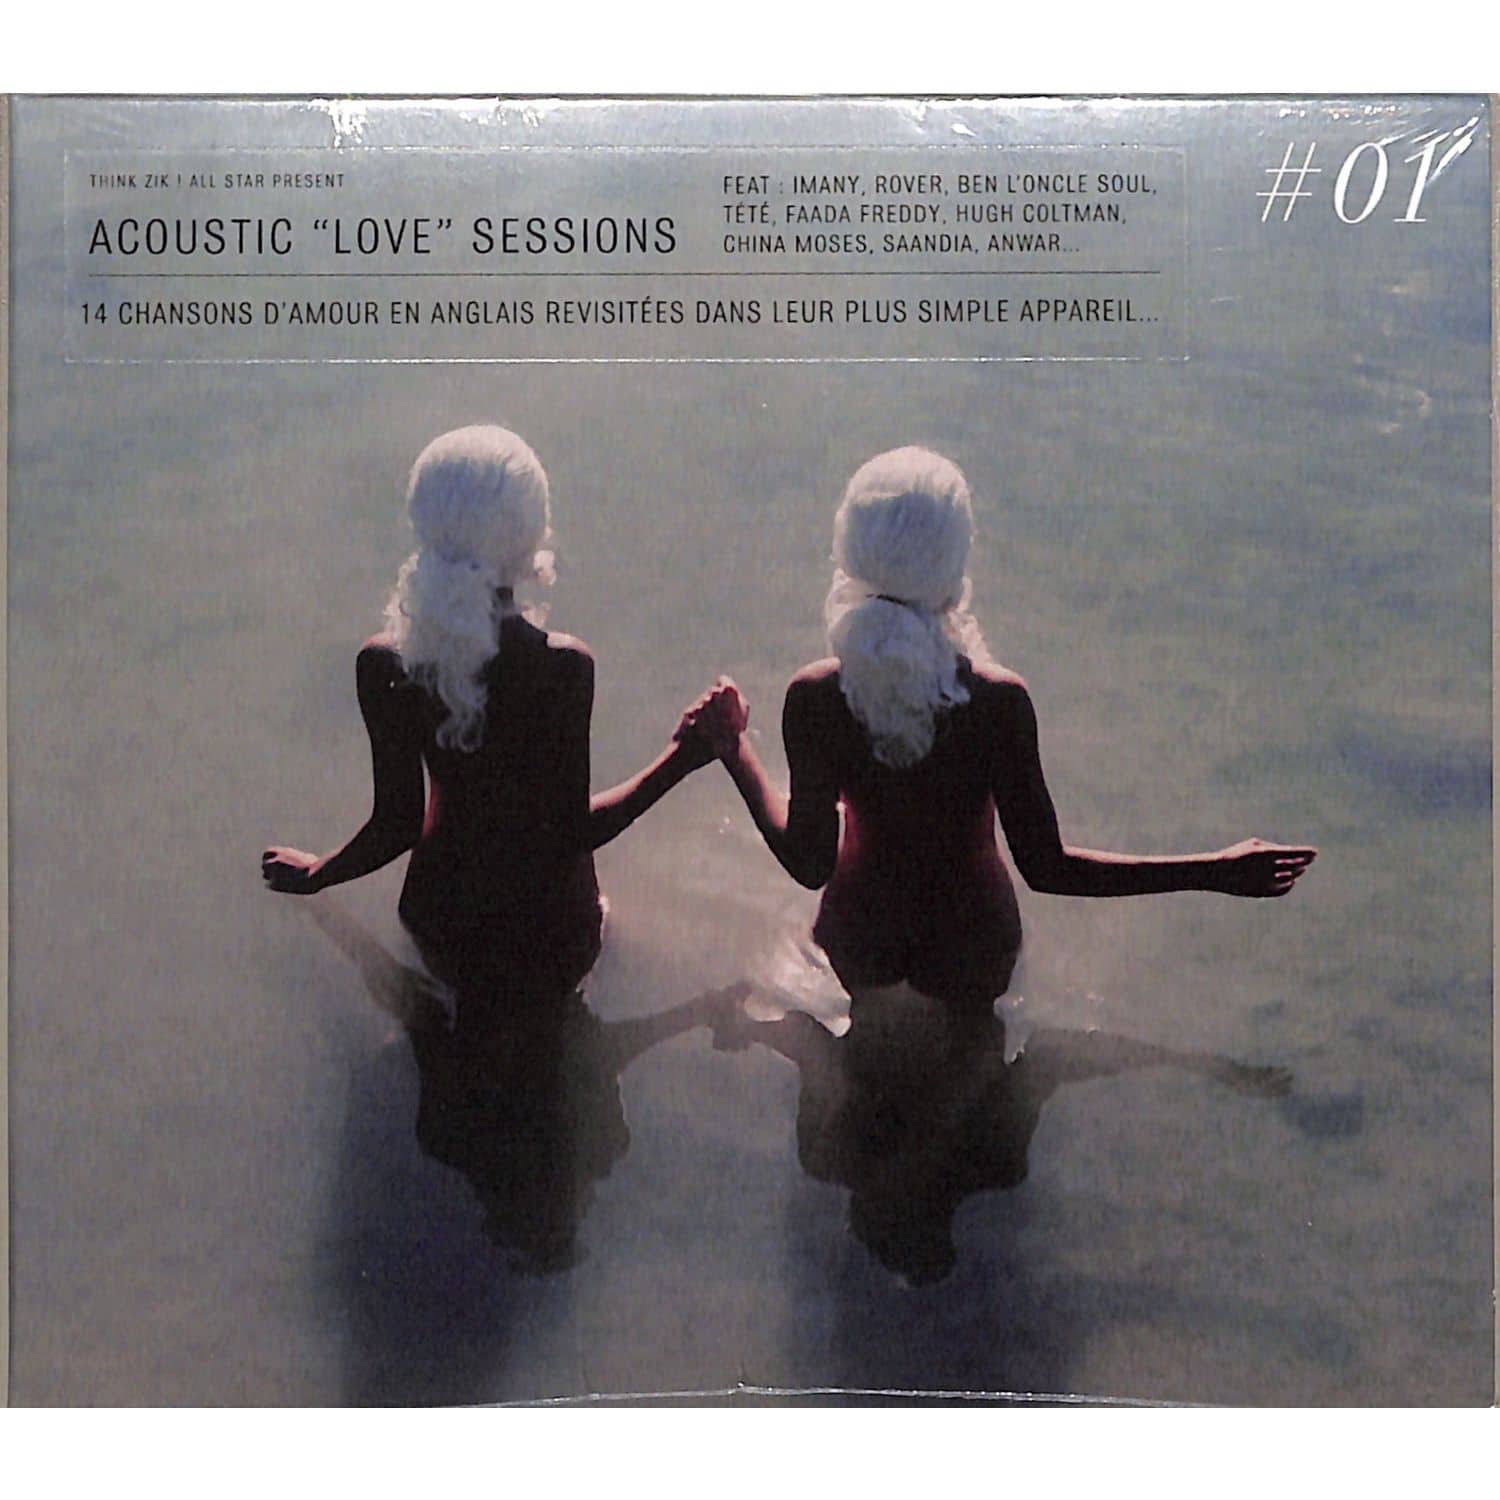 Think Zik All Star - ACOUSTIC LOVE SESSIONS 